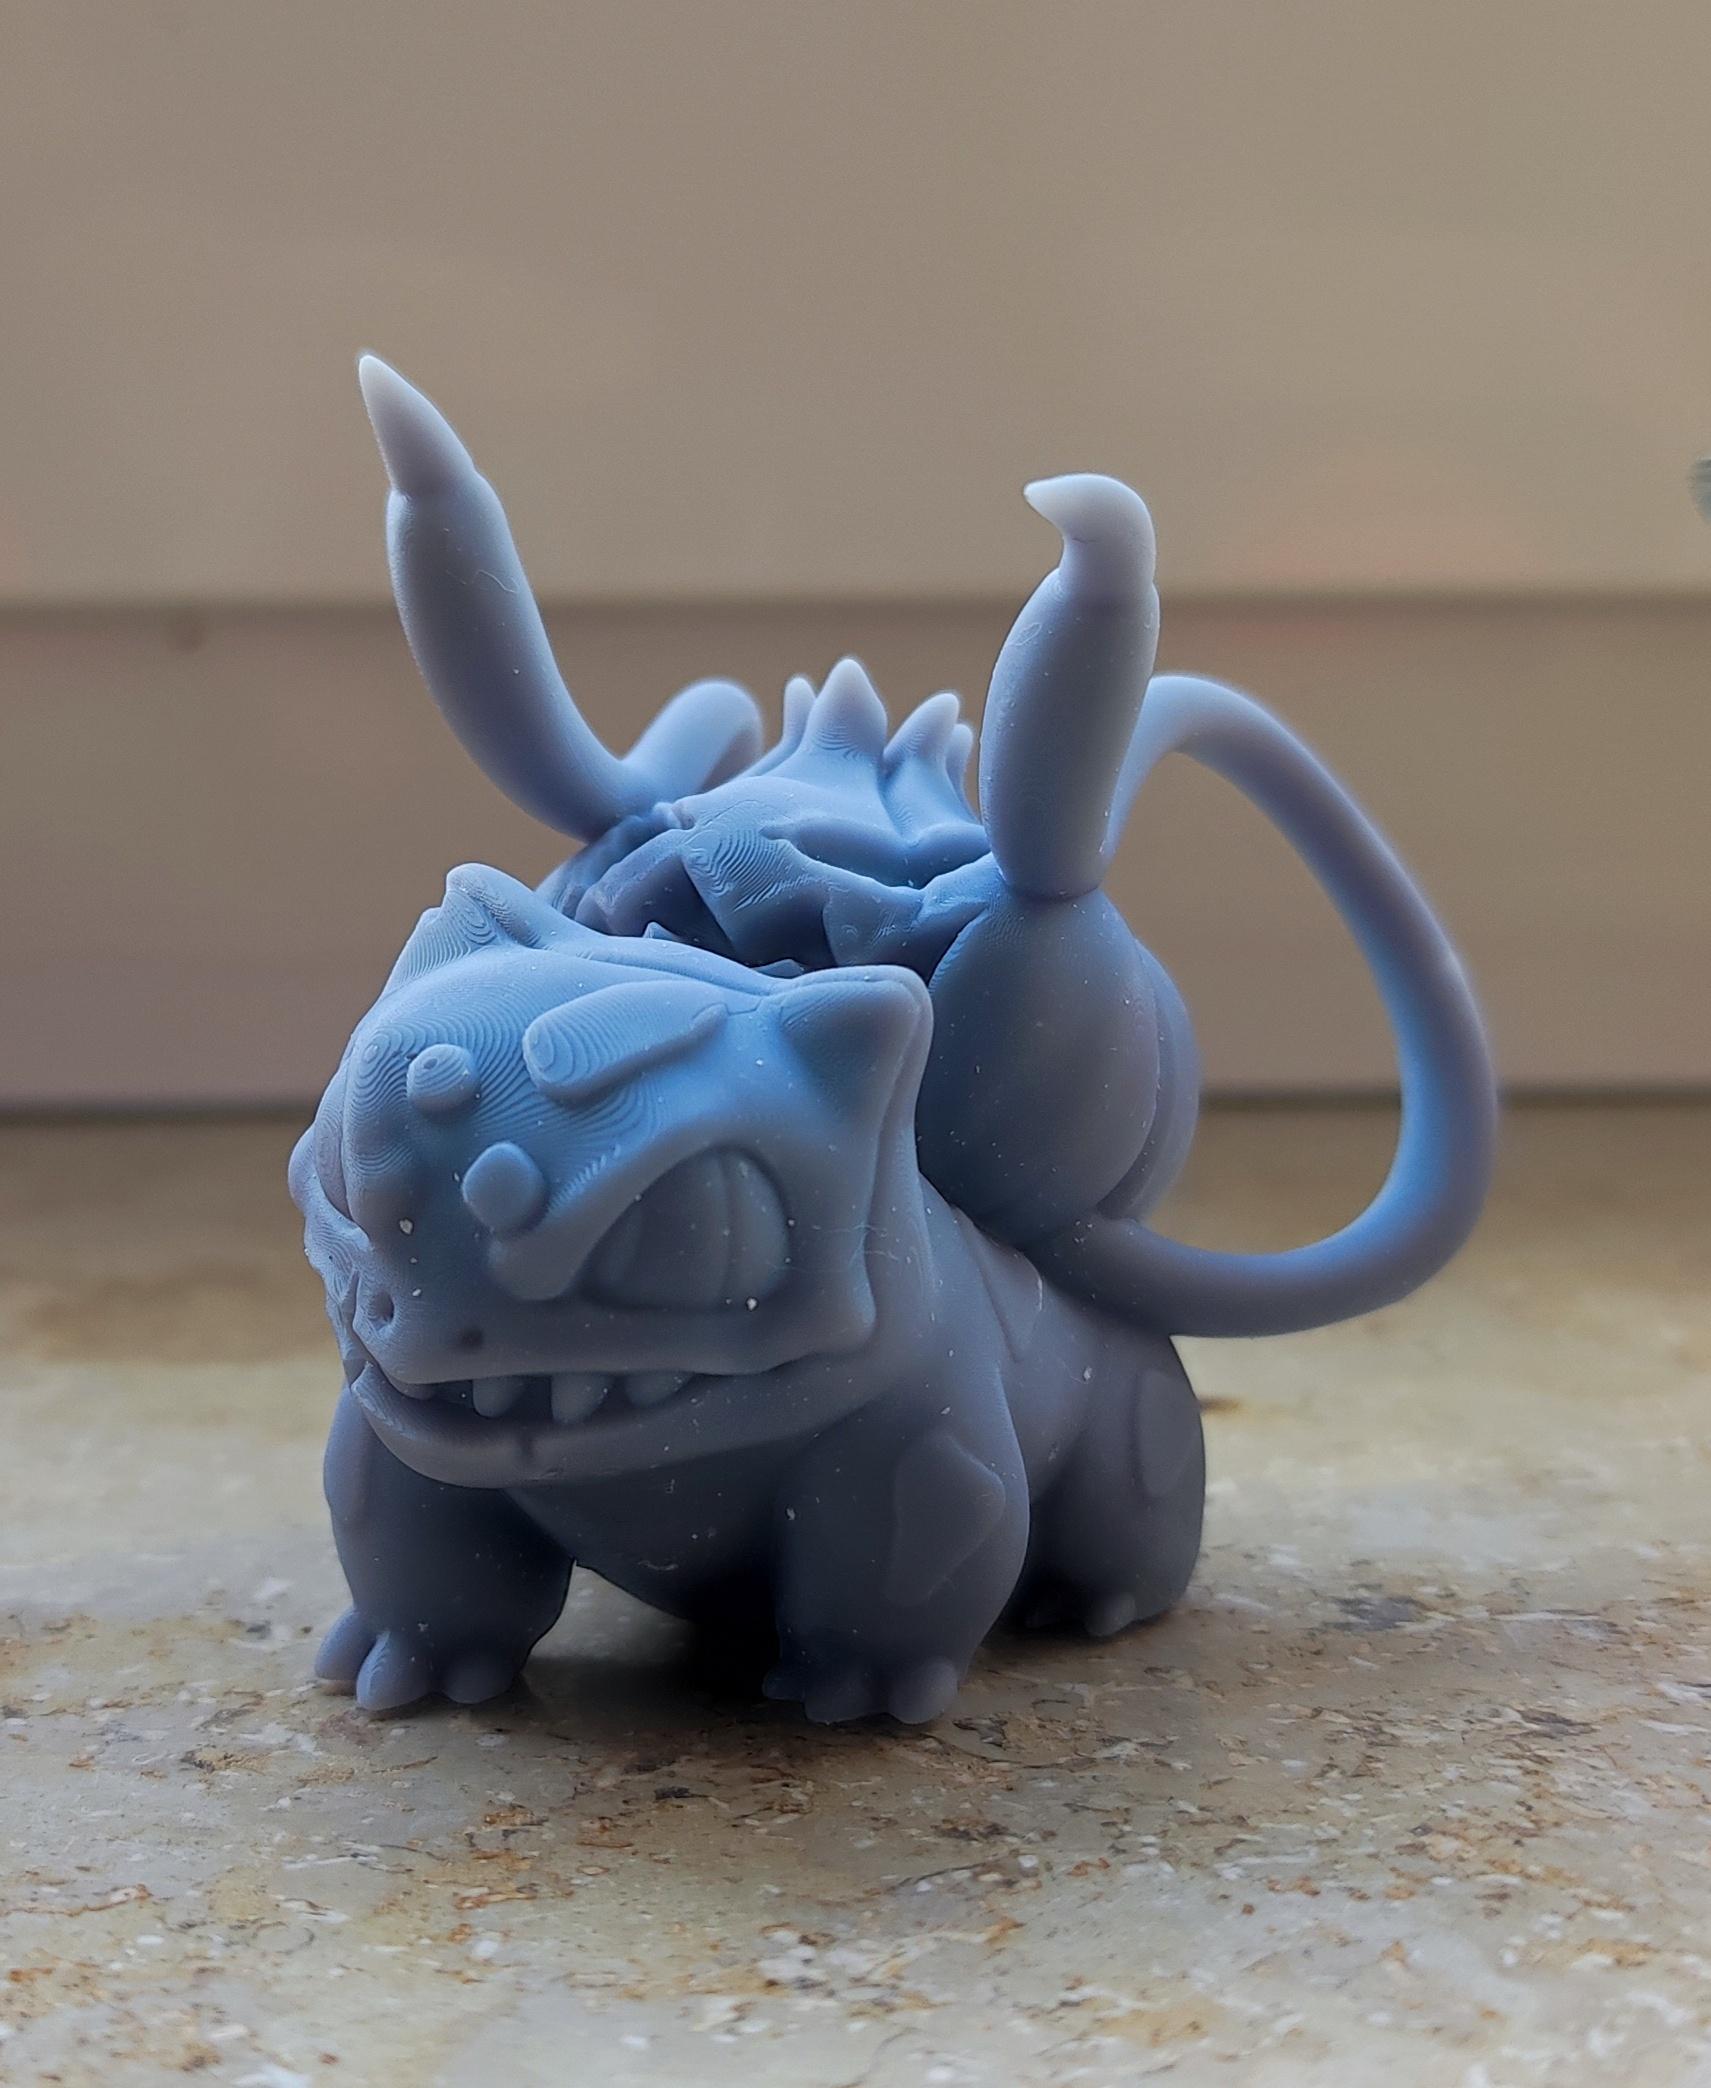 Bulbasaw  - Printed in Resin, using the Anycubic Photon Mono X with Anycubic Standard Resin Grey - 3d model